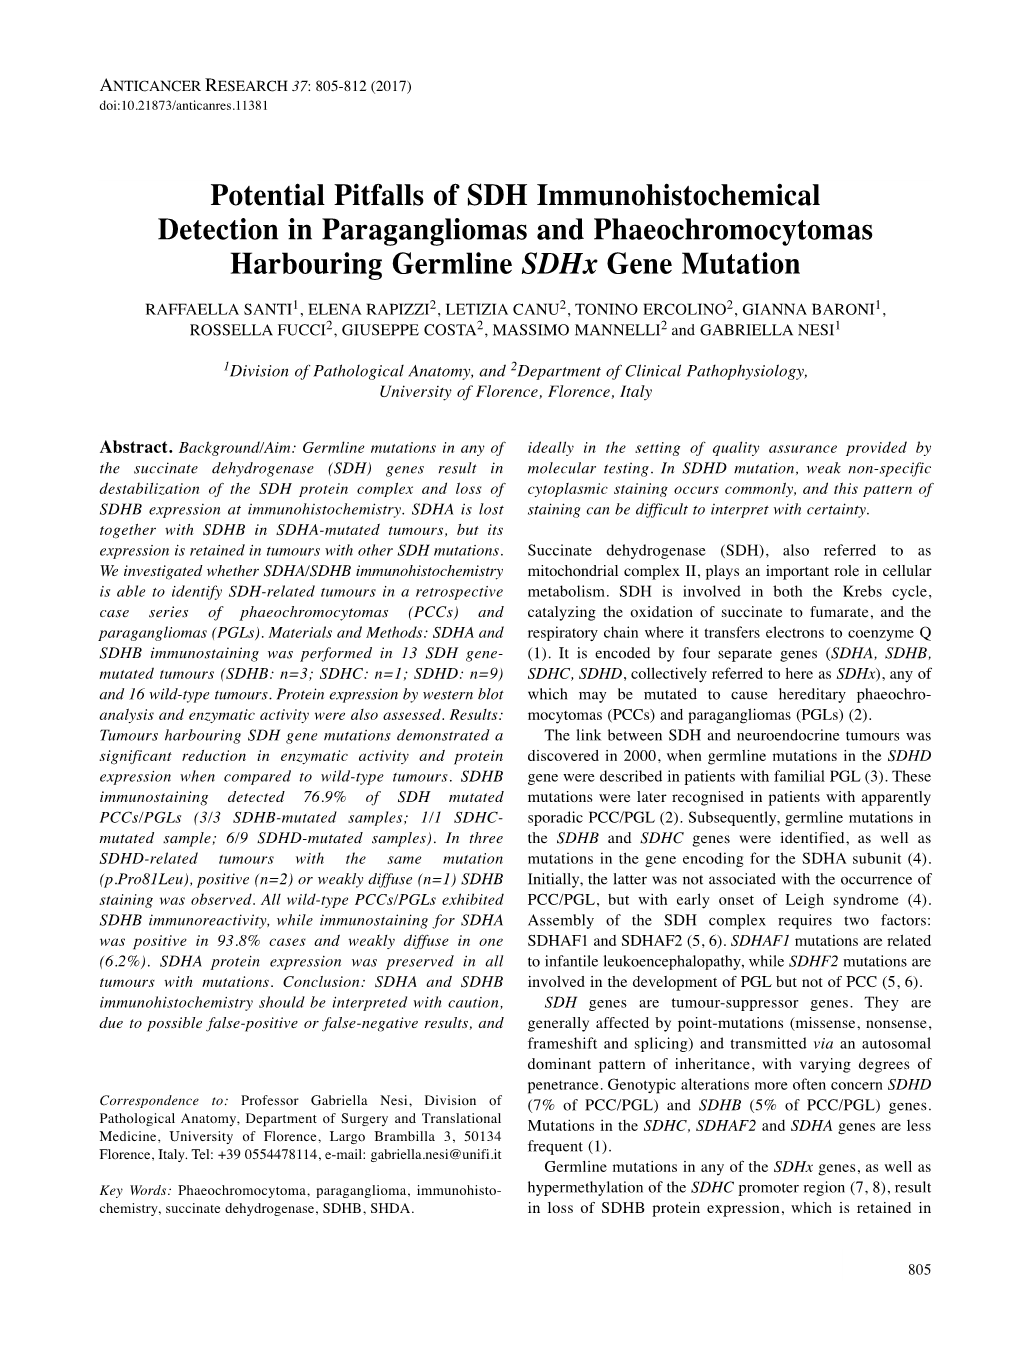 Potential Pitfalls of SDH Immunohistochemical Detection In